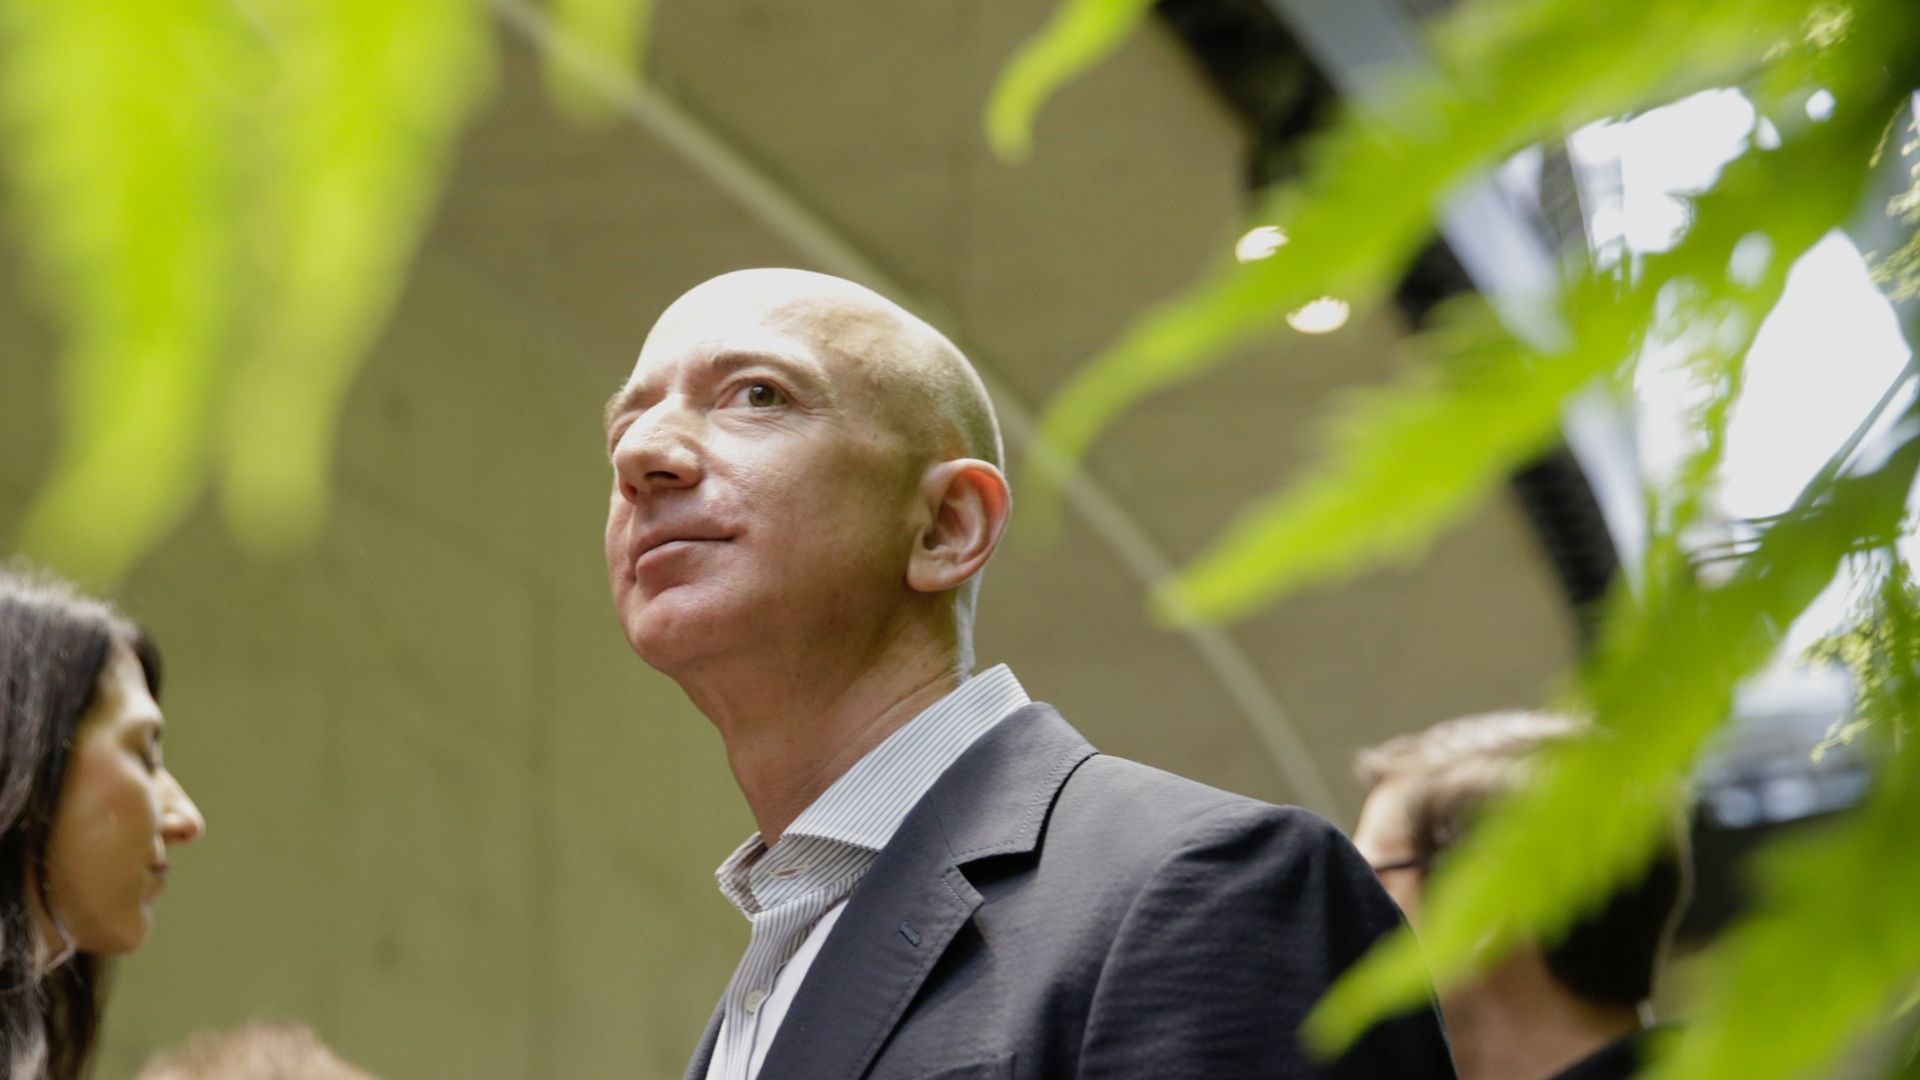 Jeff Bezos in focus in the background, with a green plant, out of focus, framing him in the foreground